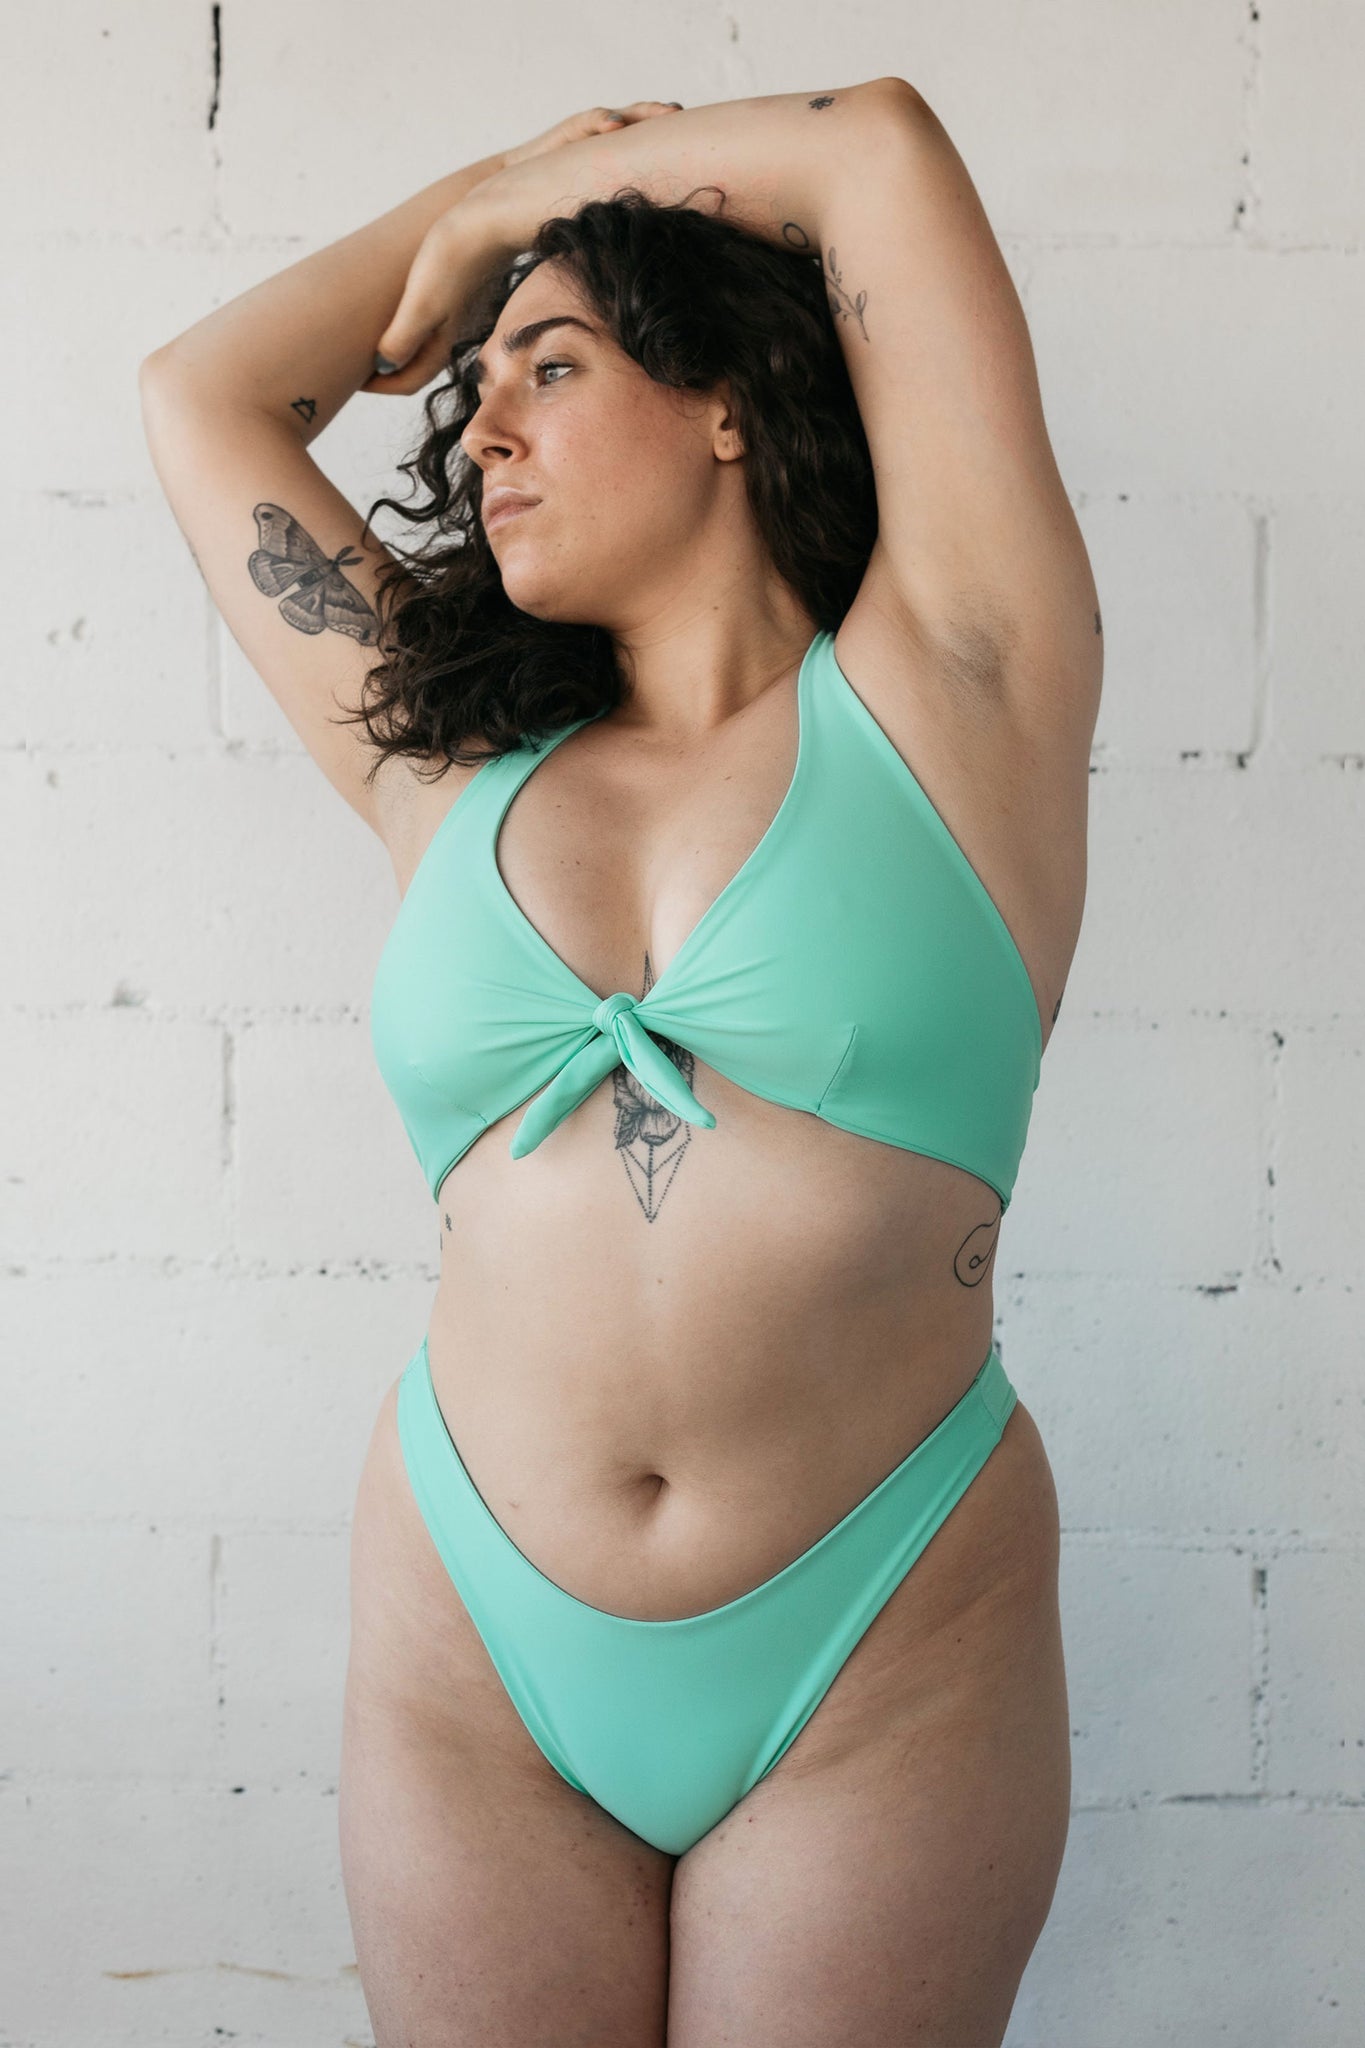 Woman looking to the side wearing a seafoam turquoise swimsuit with high cut bikini bottoms and adjustable tie front bikini top